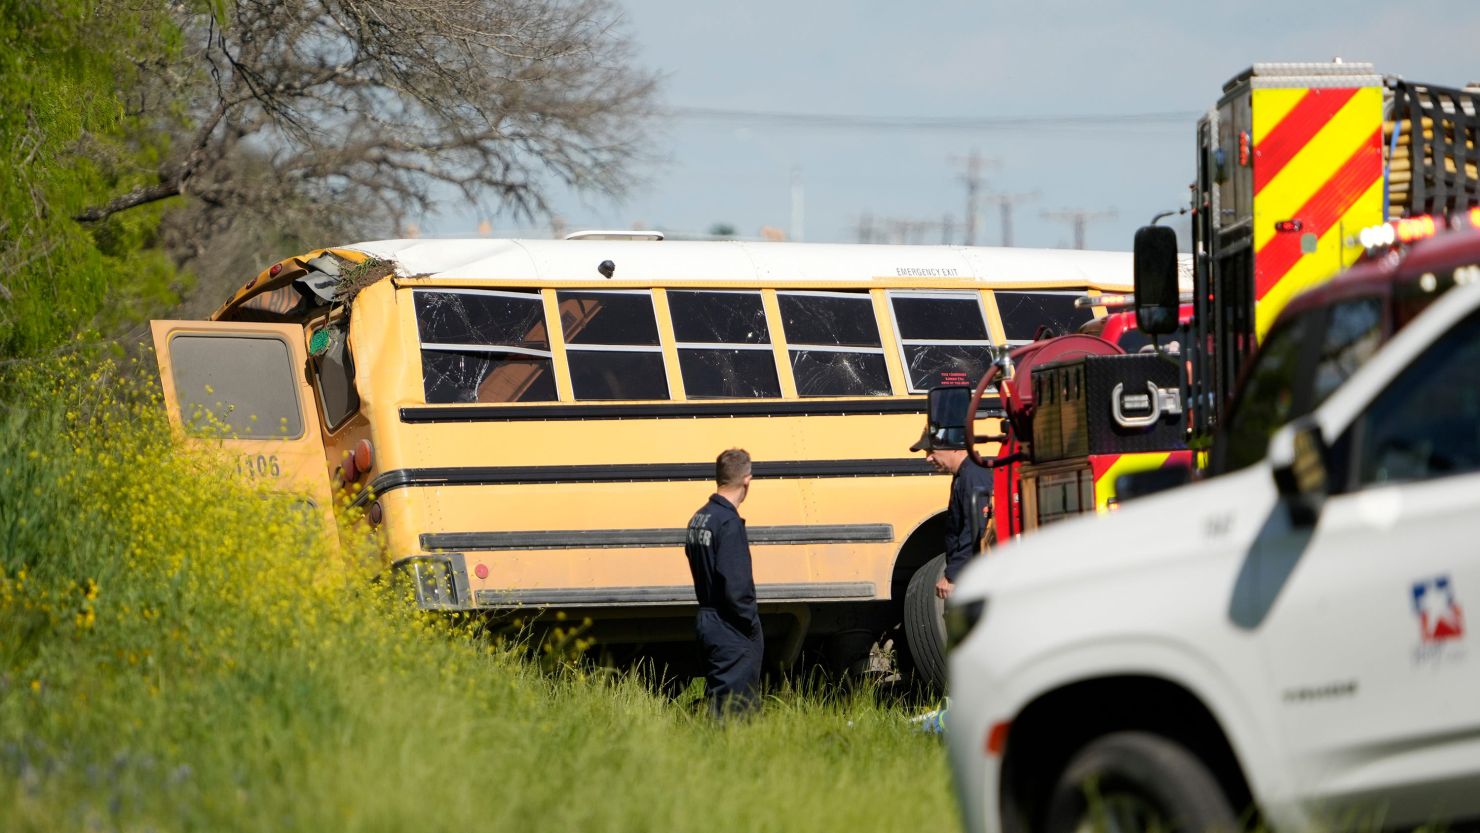 A total of 44 students and 11 adults were aboard a school bus in Texas when it was struck by a concrete truck Friday.